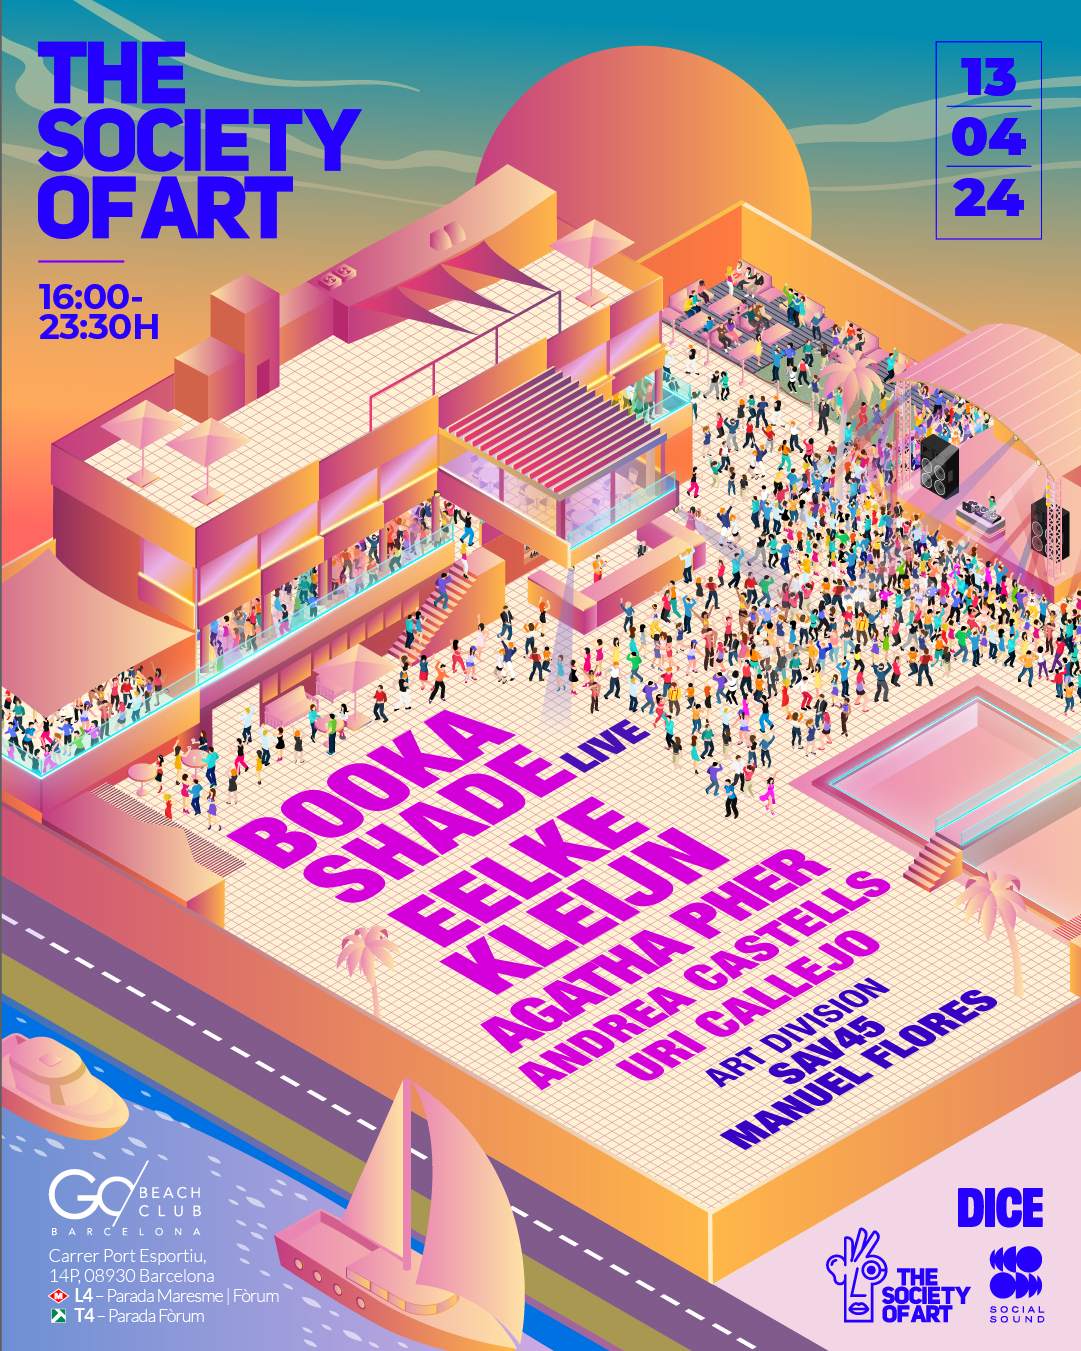 The Society of Art: Booka Shade Live & Eelke Kleijn ( Open Air Festival ) - フライヤー表